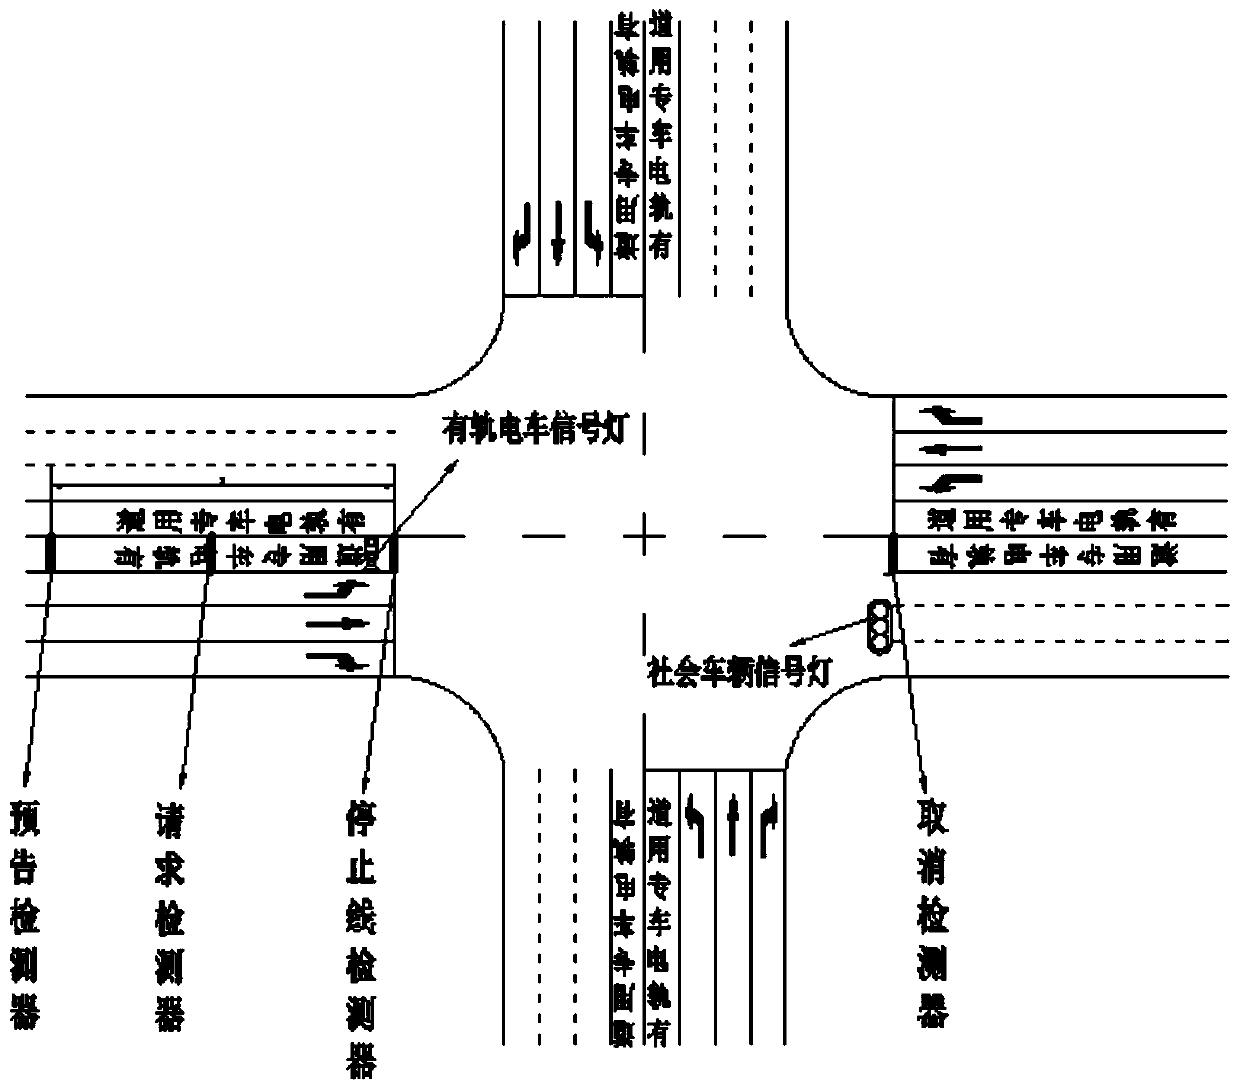 Coordinated Priority Control Method for Double Tram Level Crossings in Meeting State